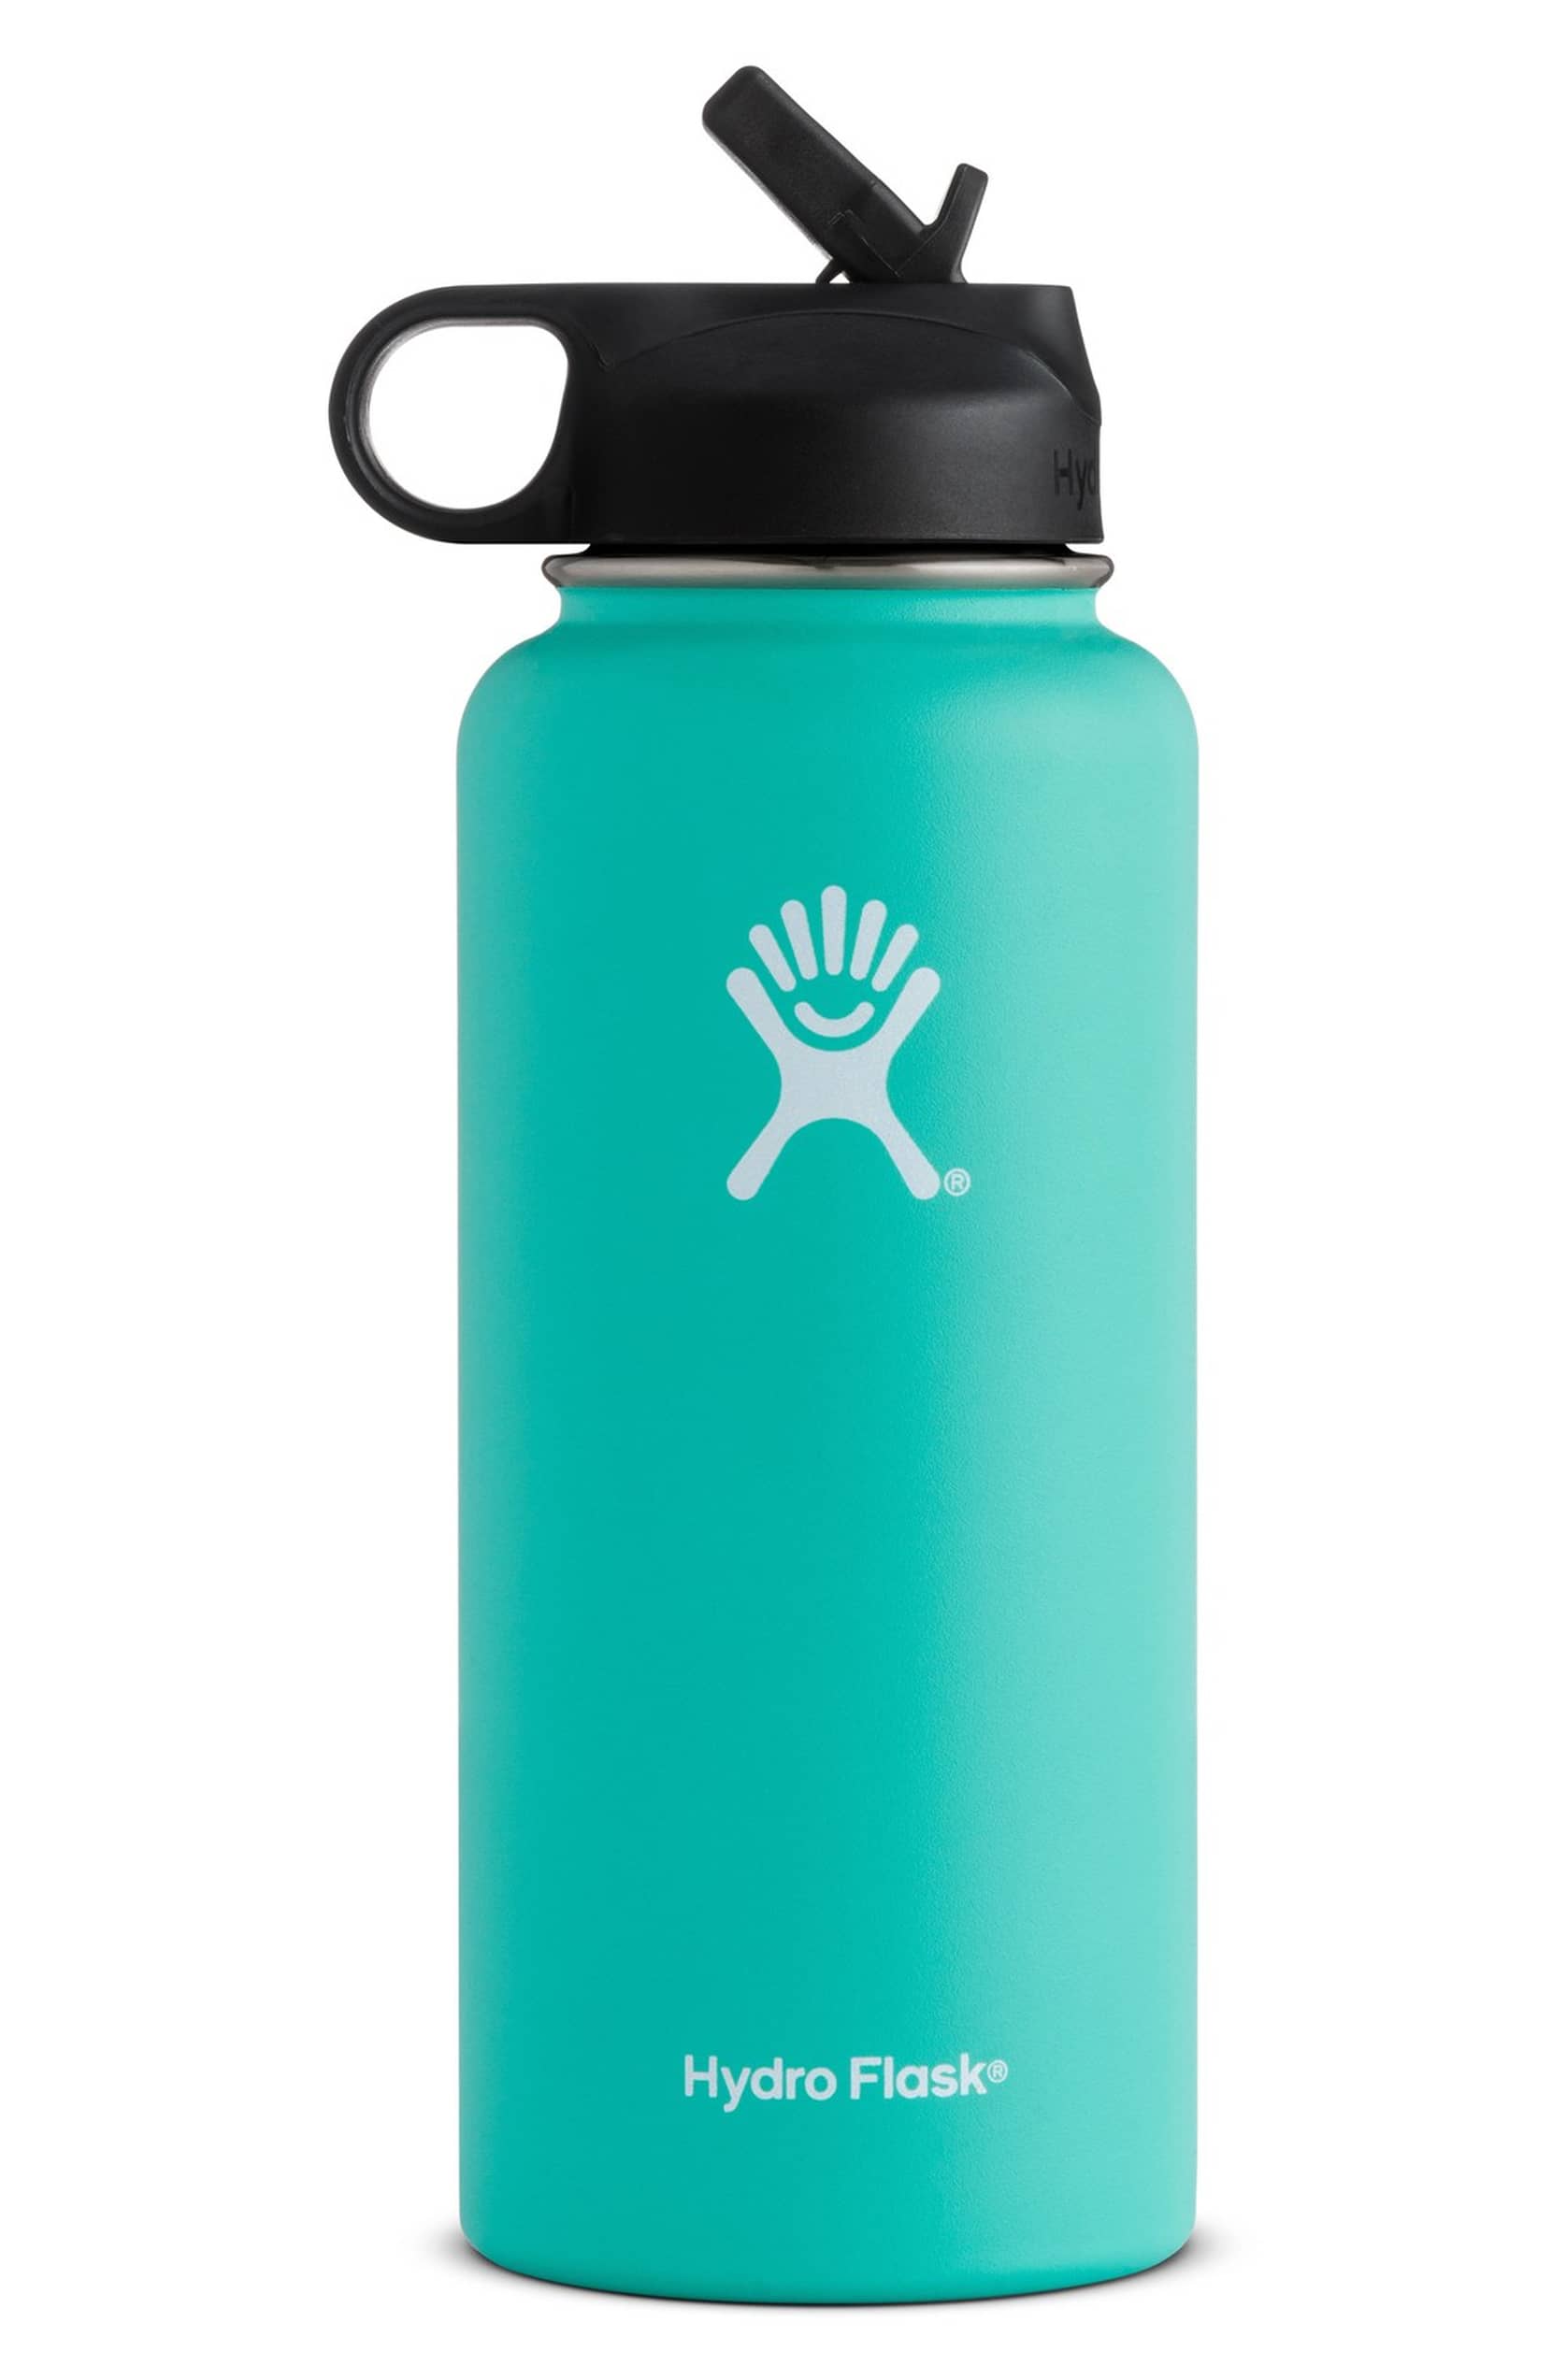 Hydro Flask, the best reusable water bottle 